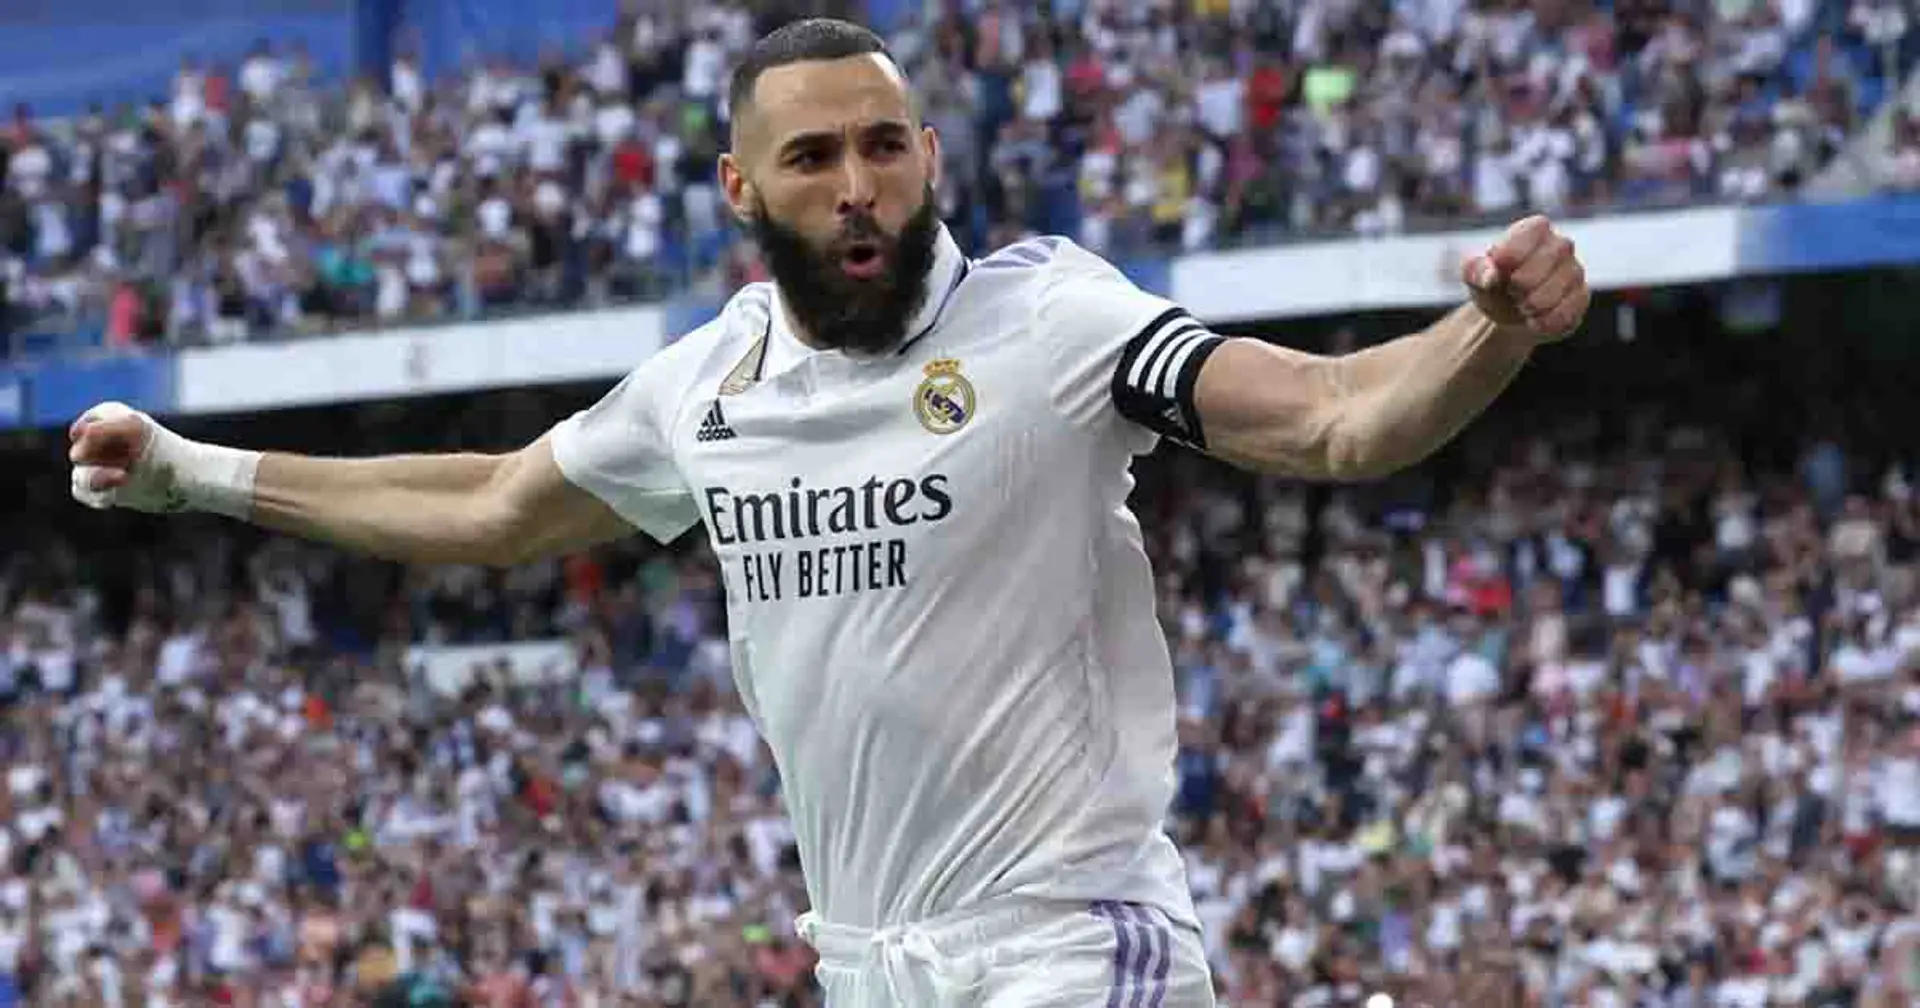 Karim Benzema beats one Real Madrid teammate to win Best Foreign Player prize in Ligue 1 awards